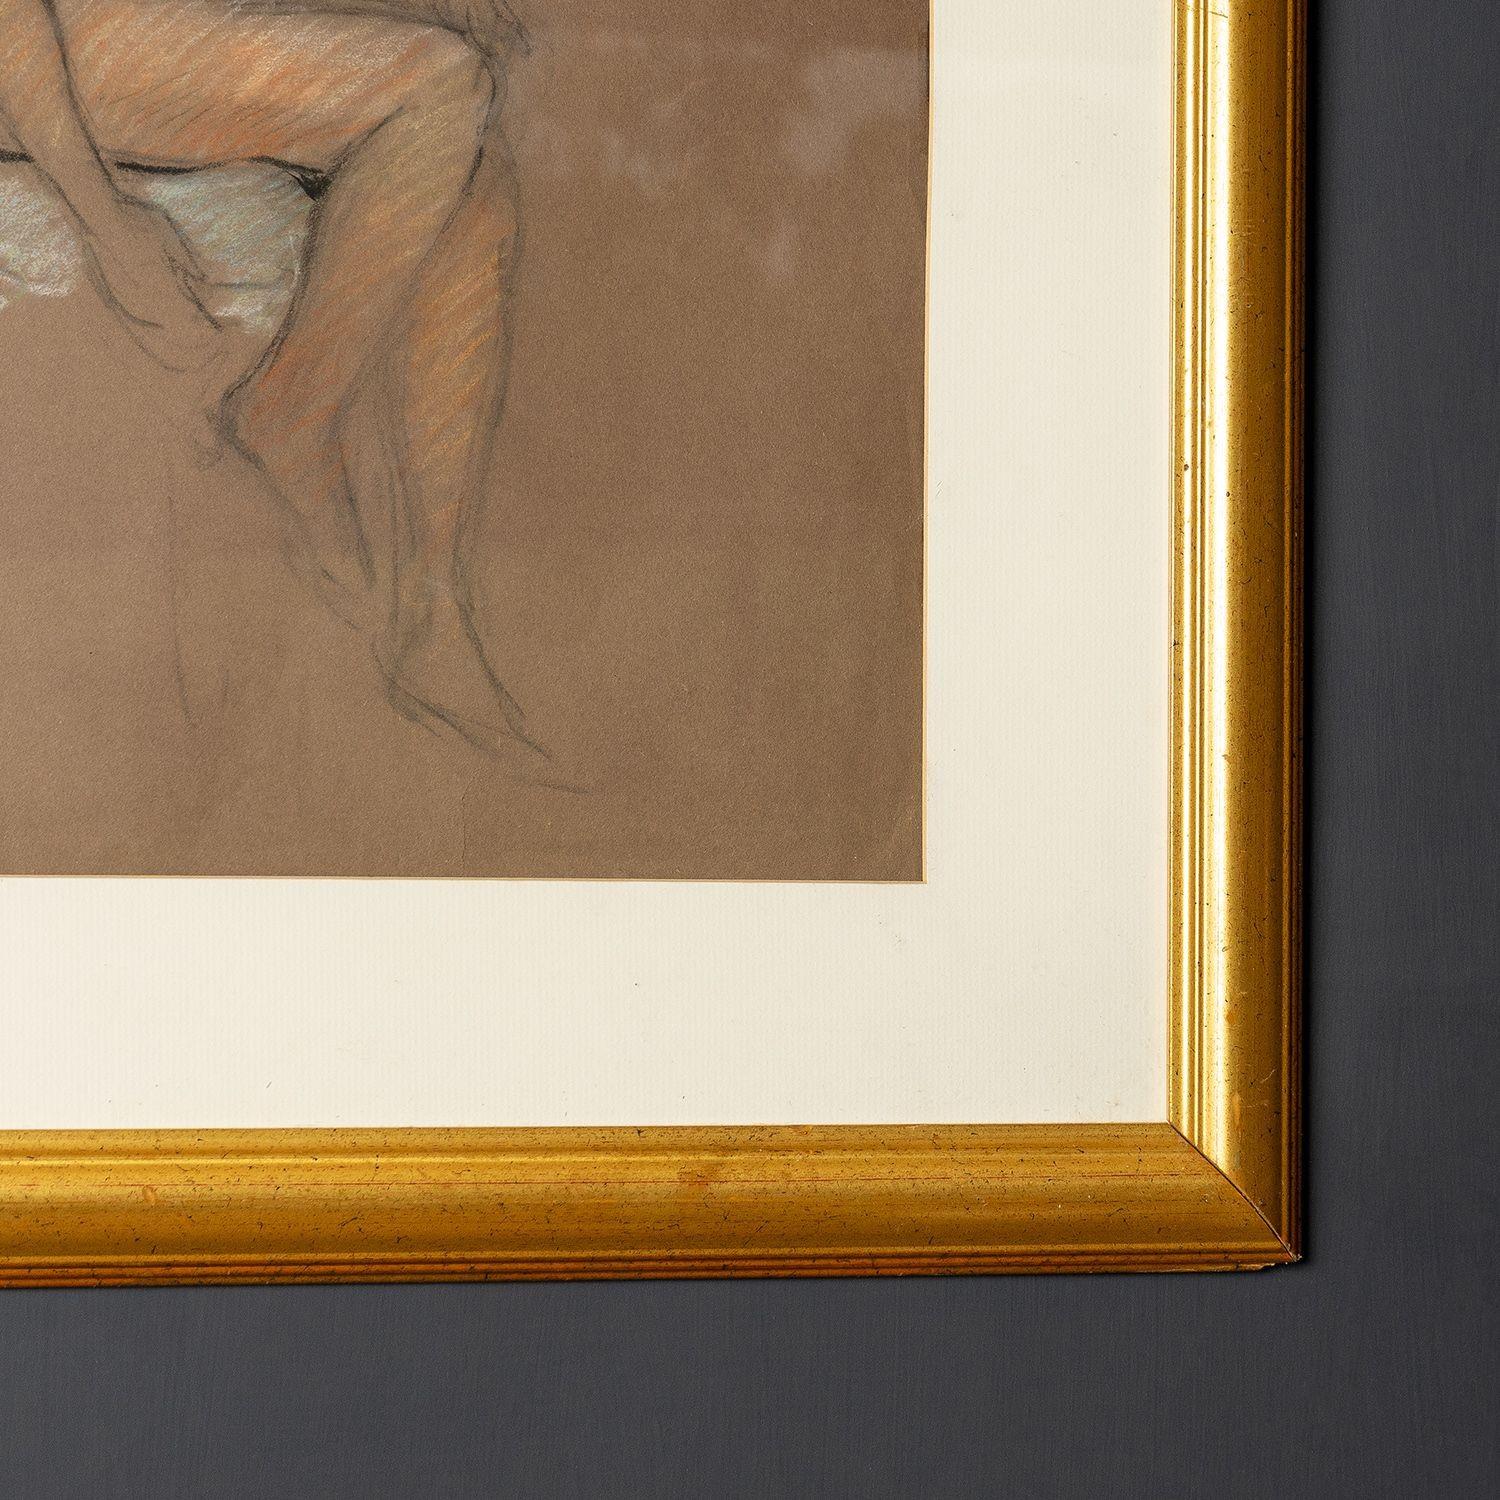 Paper Vintage Original French Female Nude Life Drawing Portrait Study Mid 20th Century For Sale